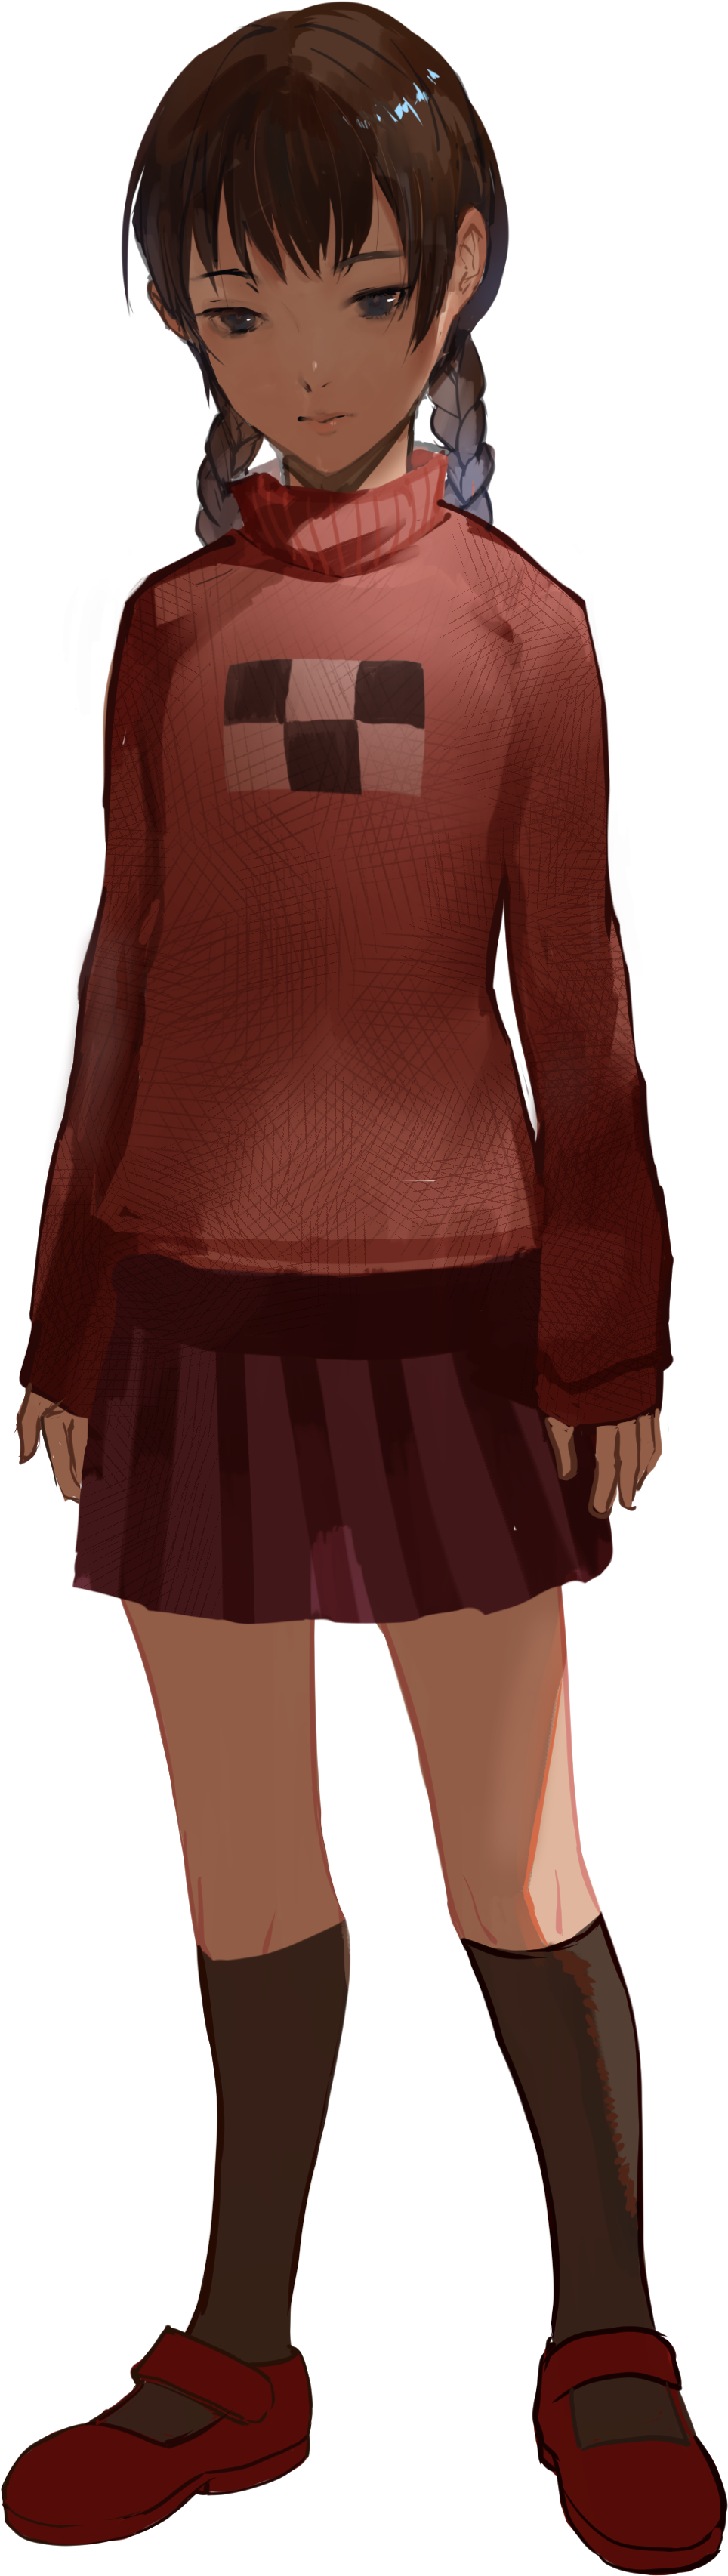 Anime Girlin Red Sweaterand Skirt PNG